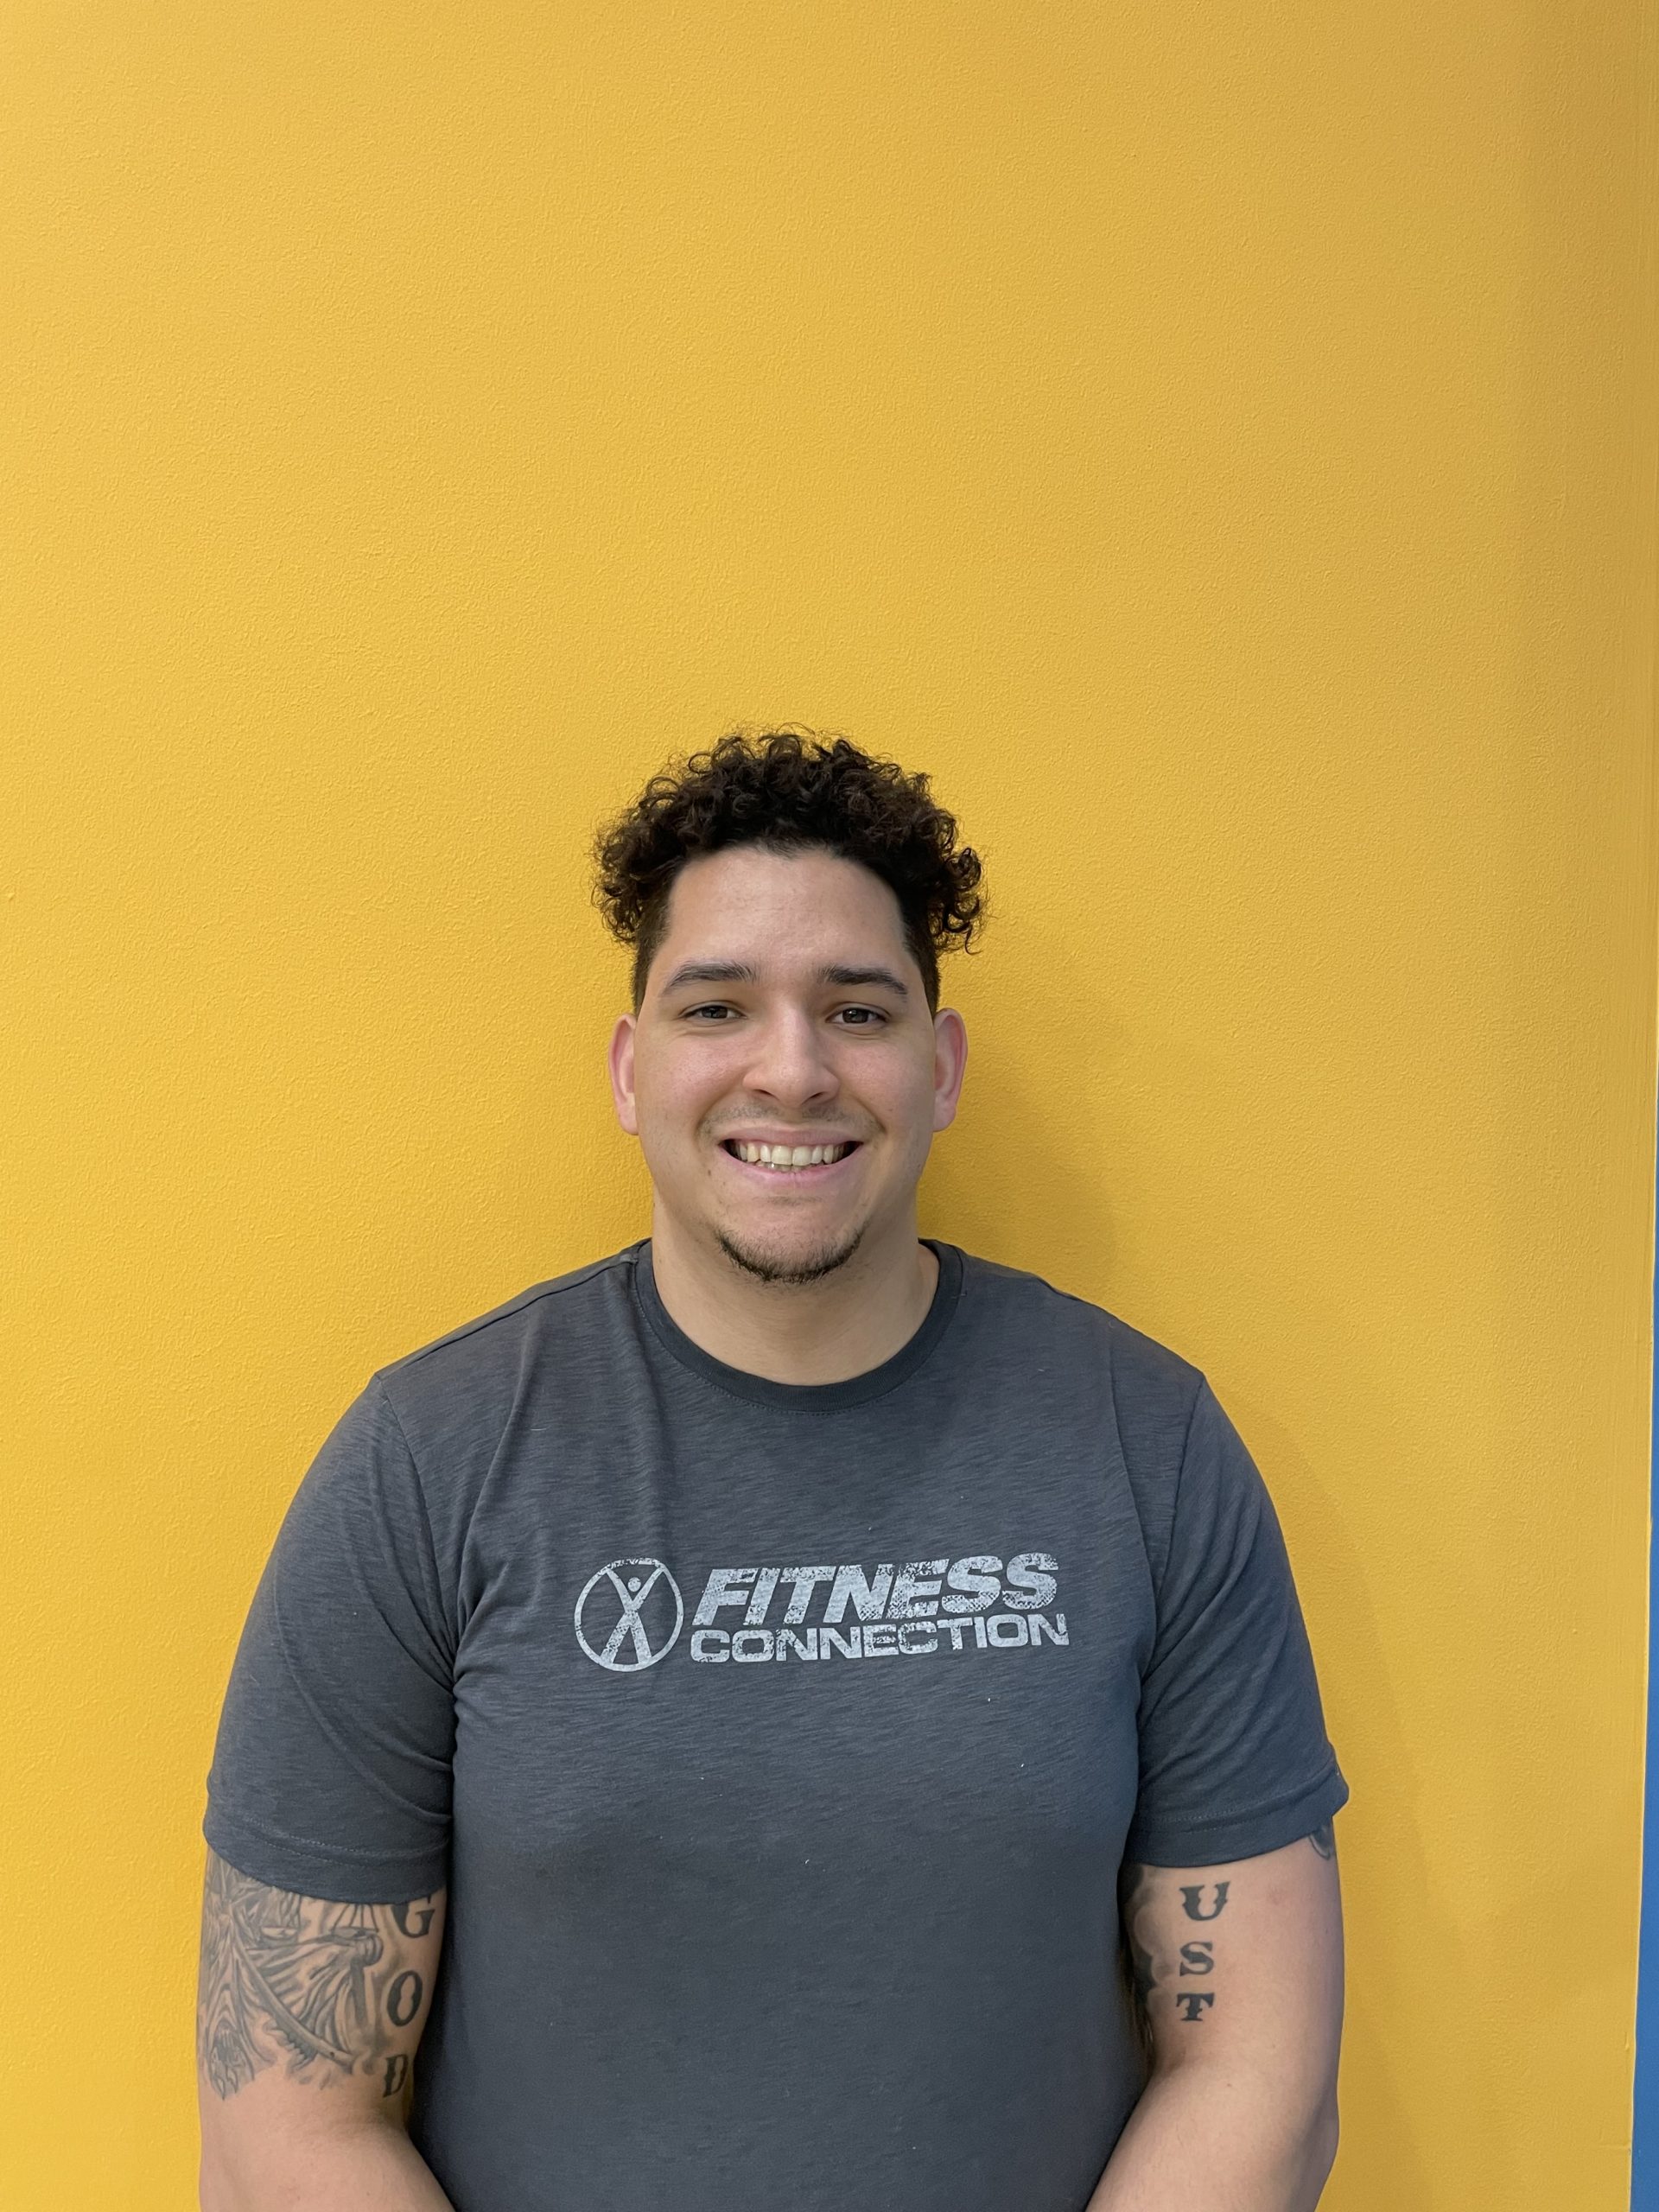 Taylor S. is the Club Manager at Fitness Connection - ALLEN